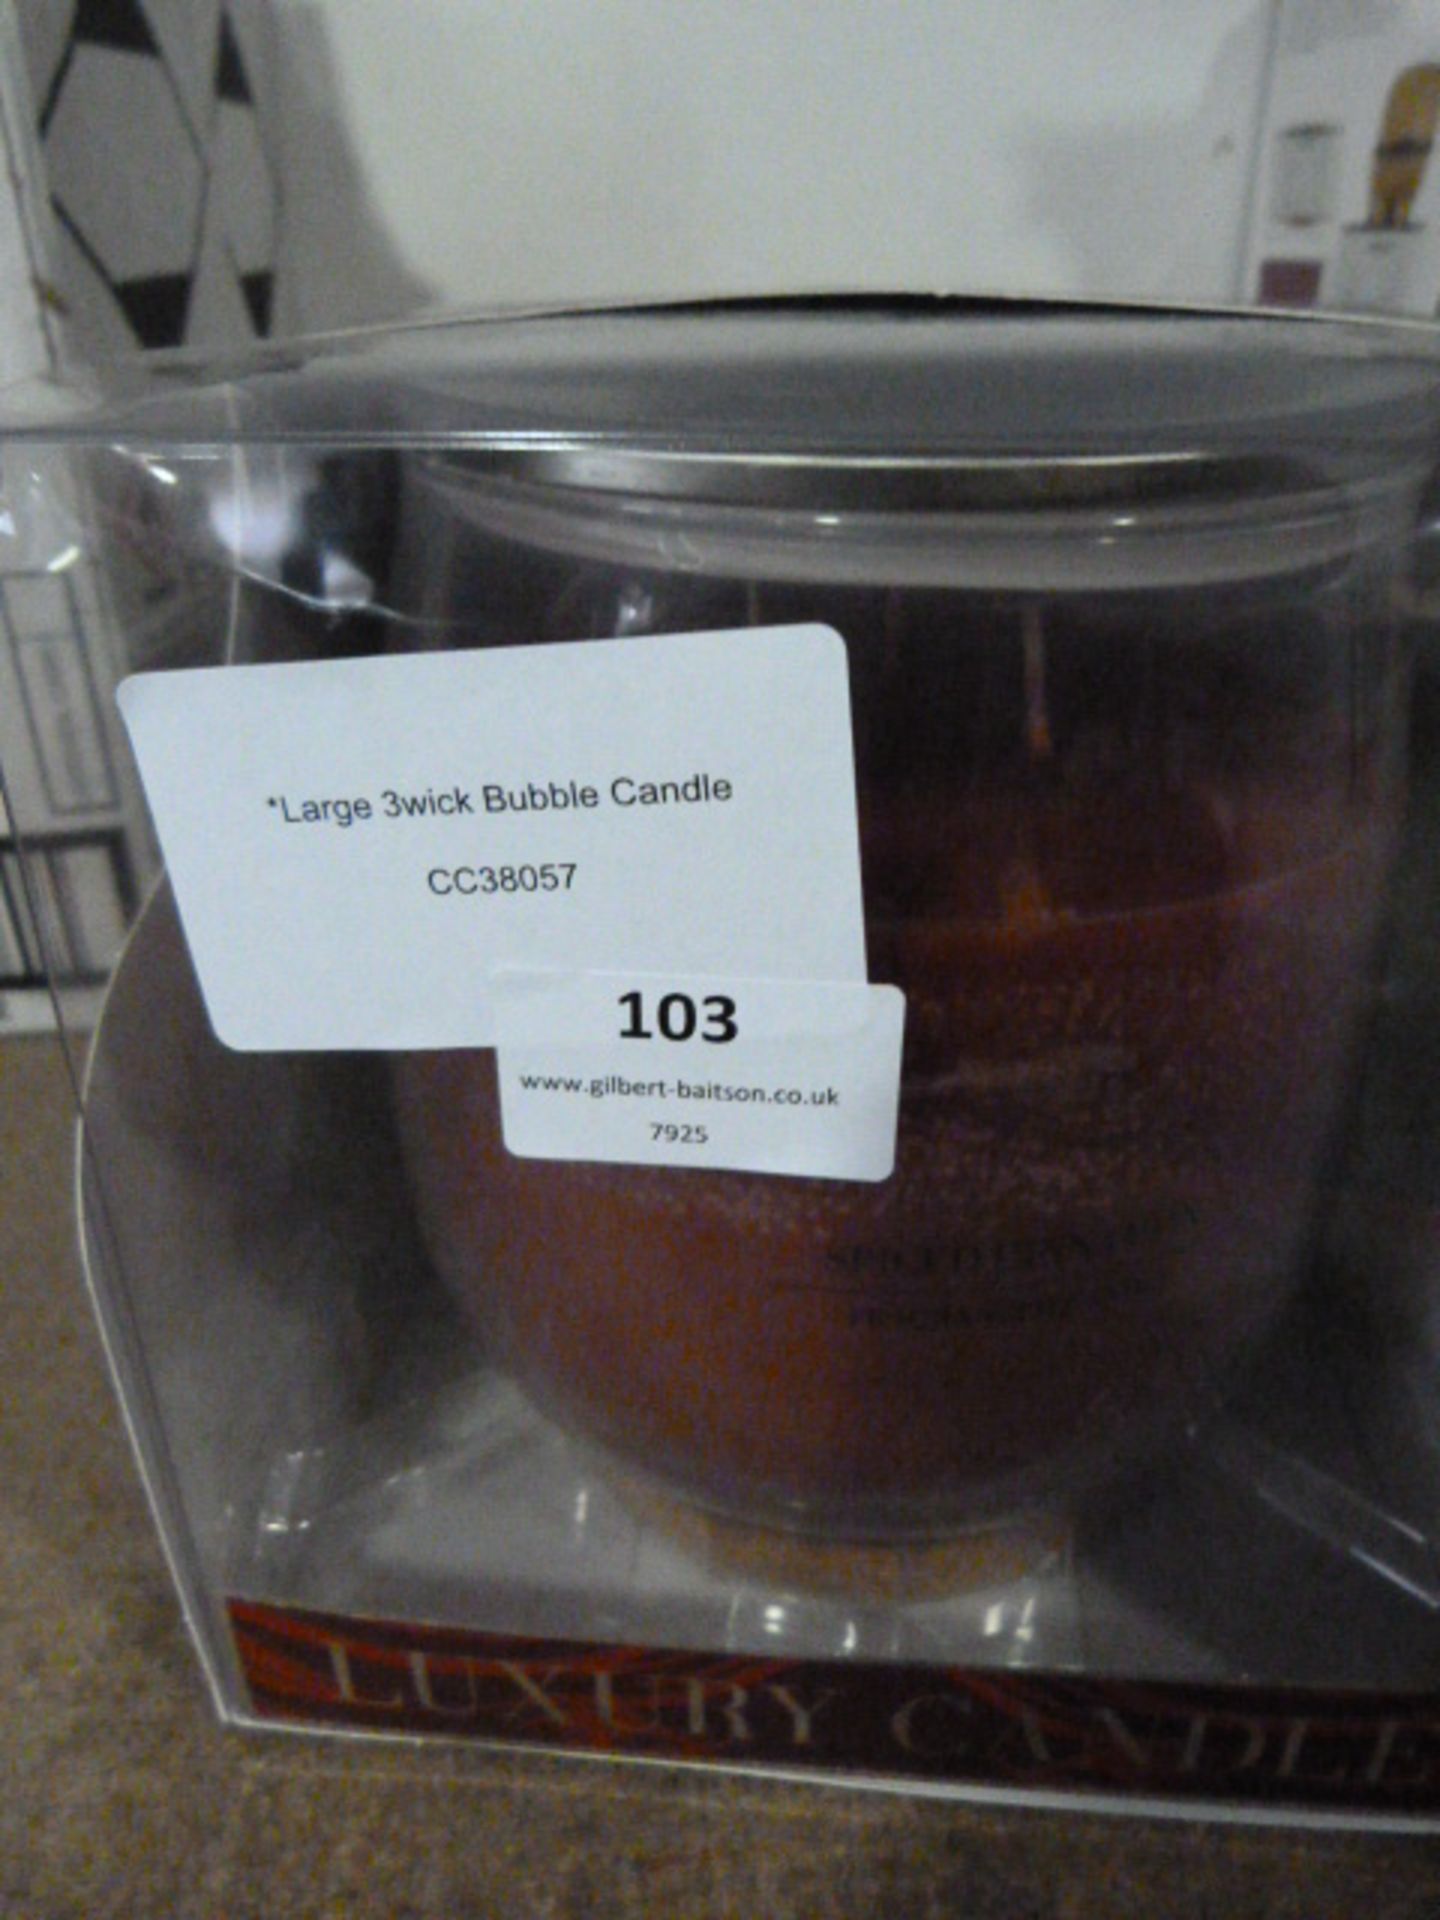 *Large 3 Wick Bubble Candle